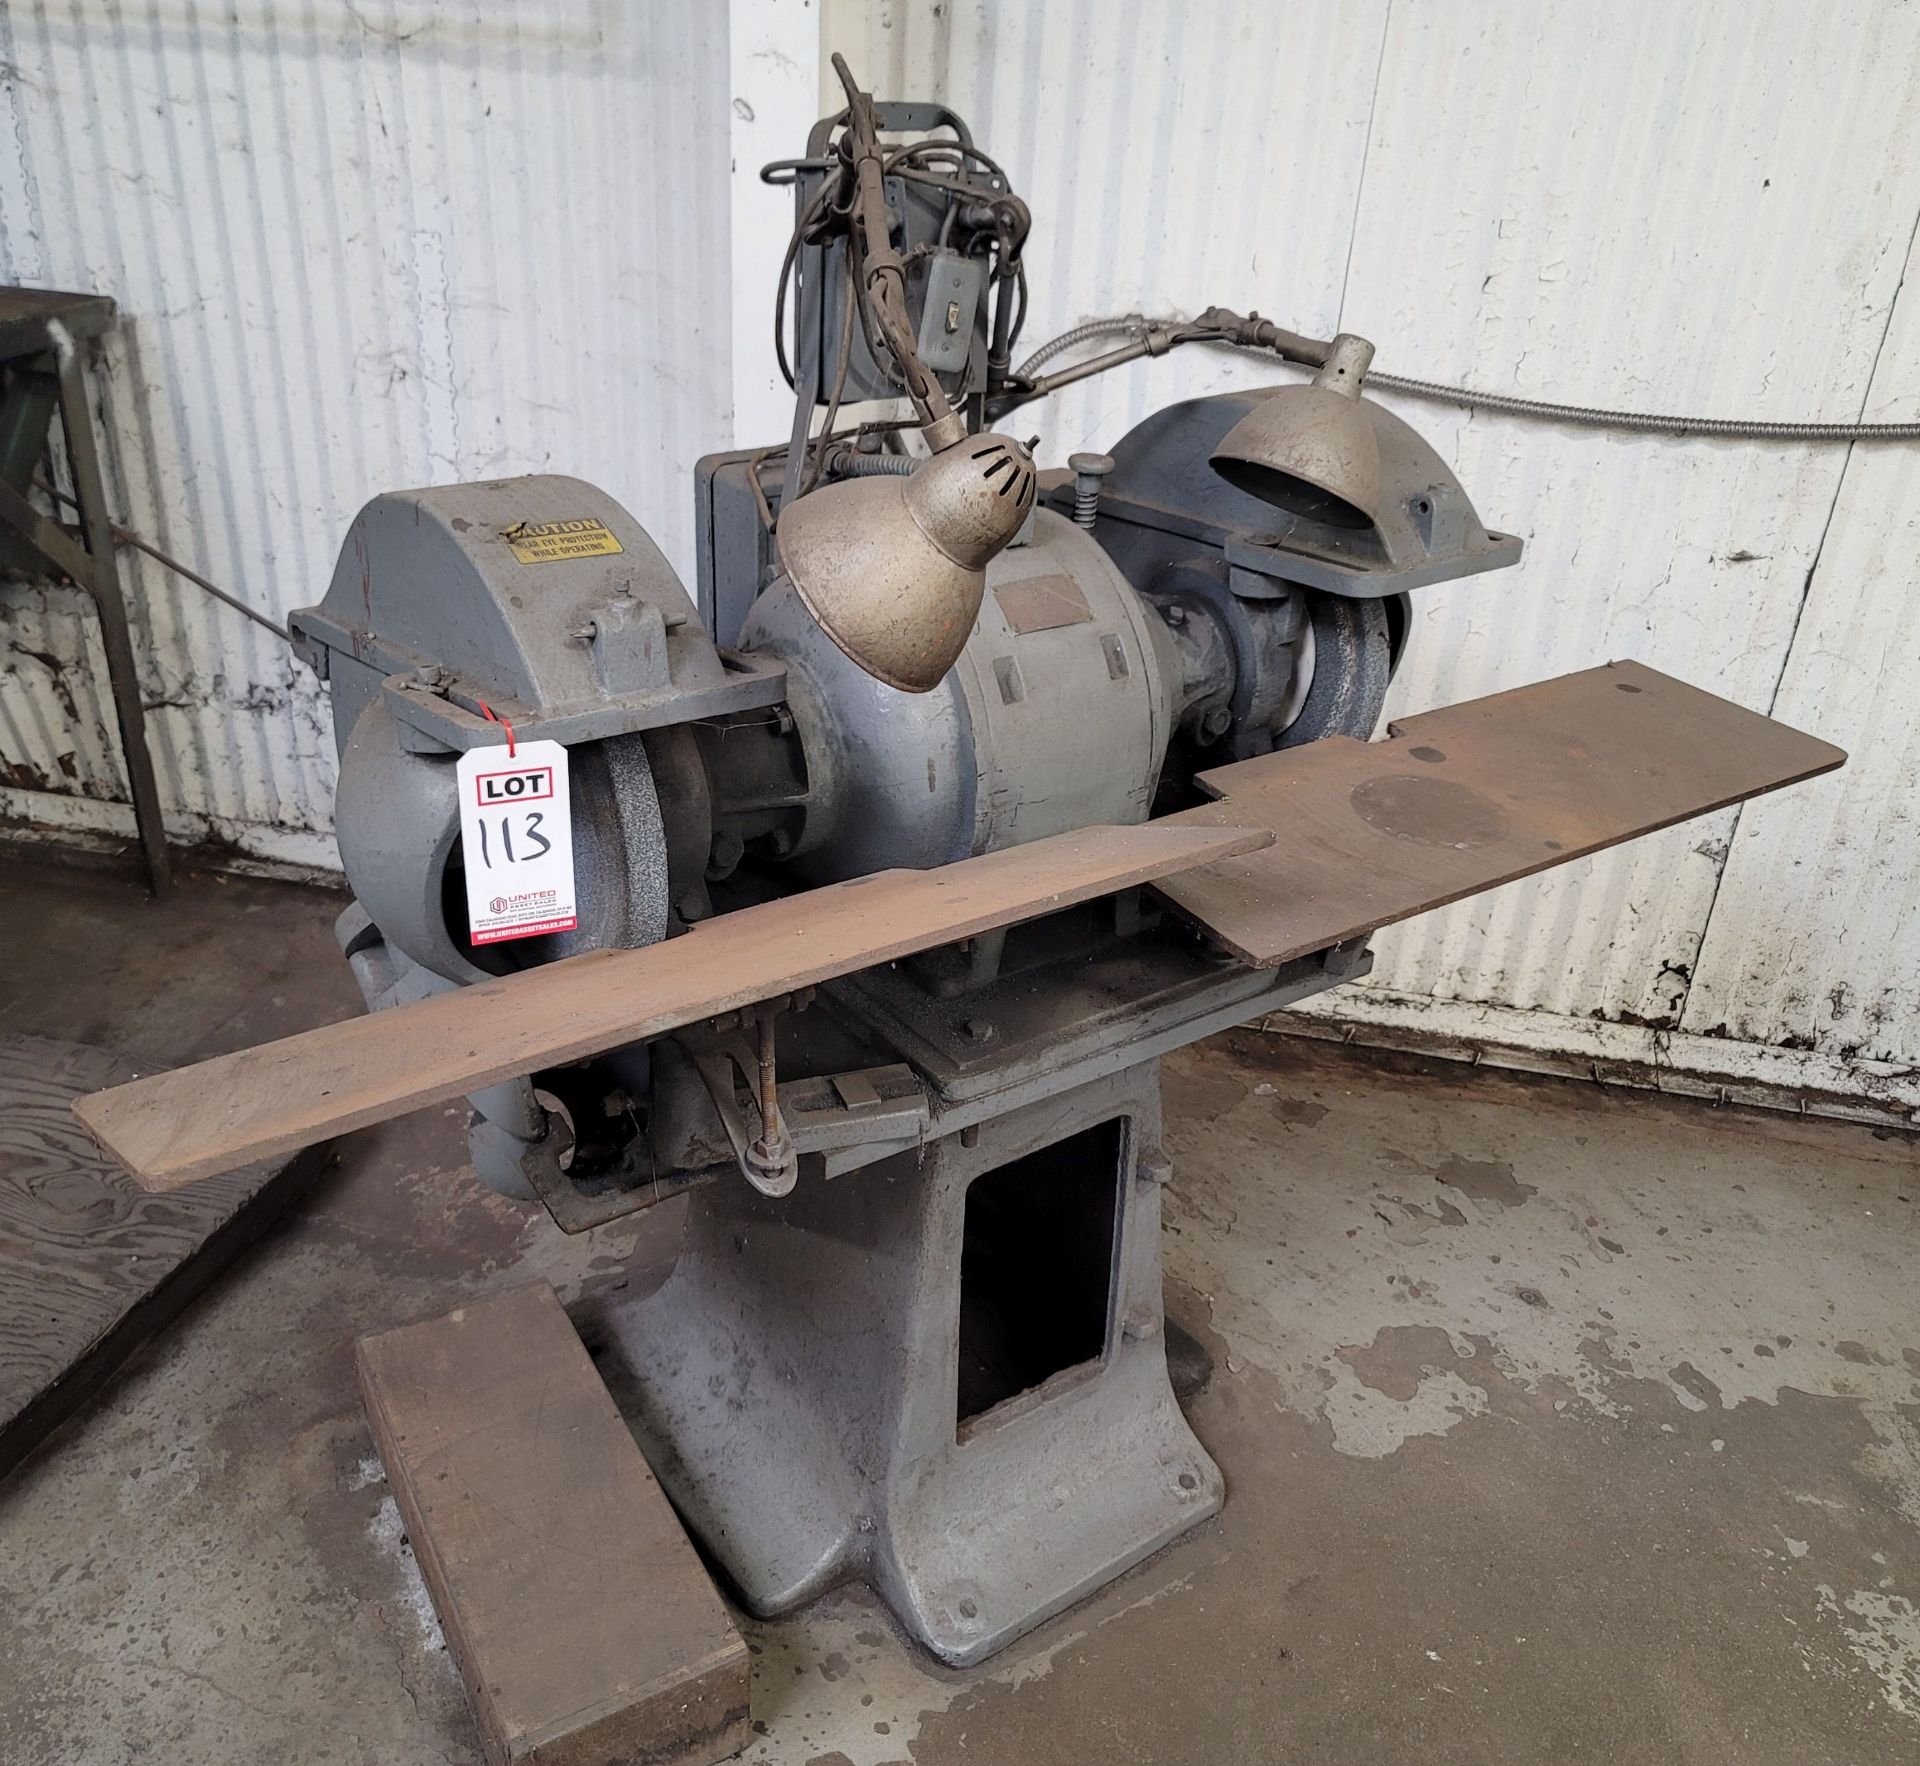 U.S. ELECTRICAL TOOL CO. DOUBLE END GRINDER, MODEL 20